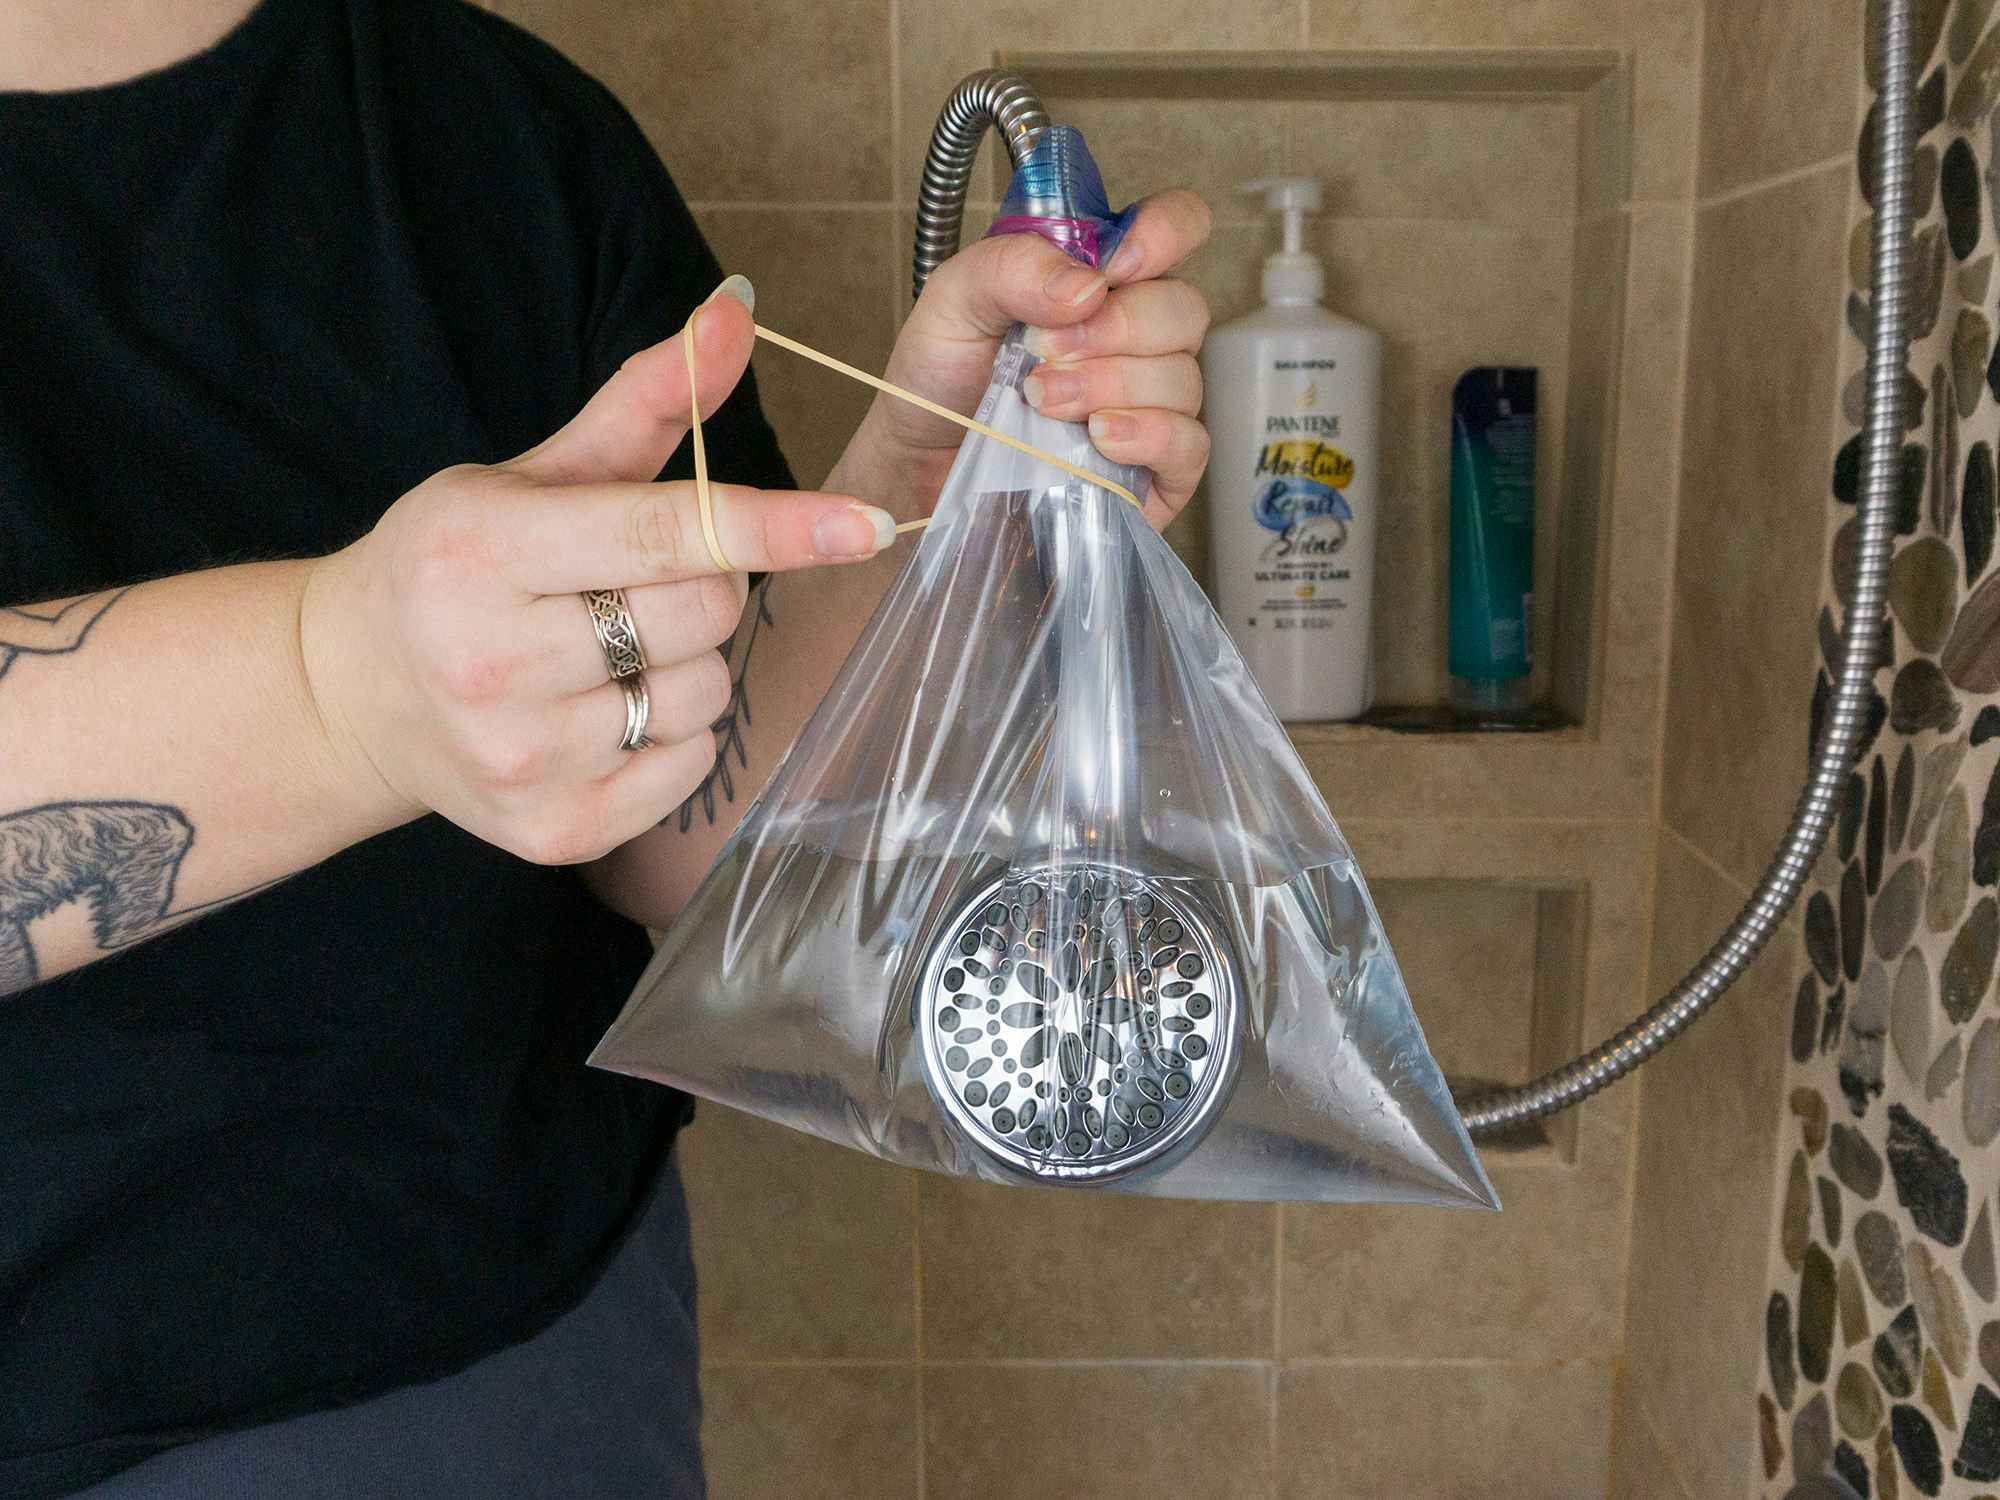 Someone putting a bag of vinegar onto their shower head and securing it with a rubber band